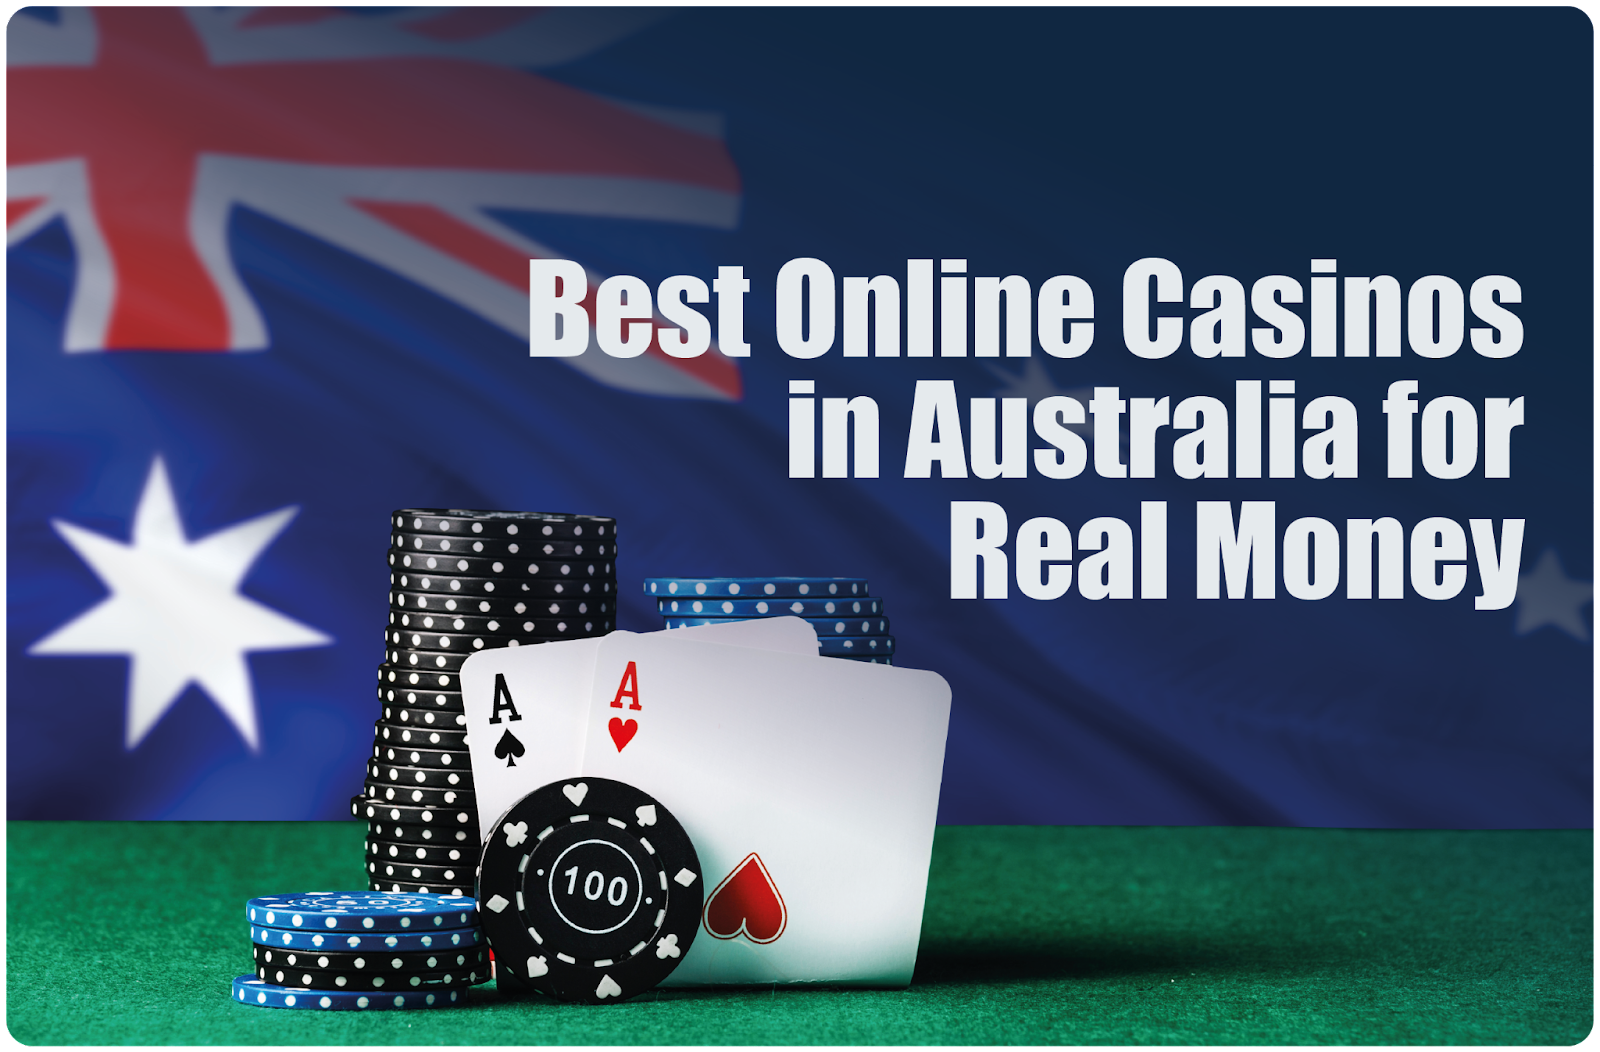 Apply These 5 Secret Techniques To Improve online-casinos